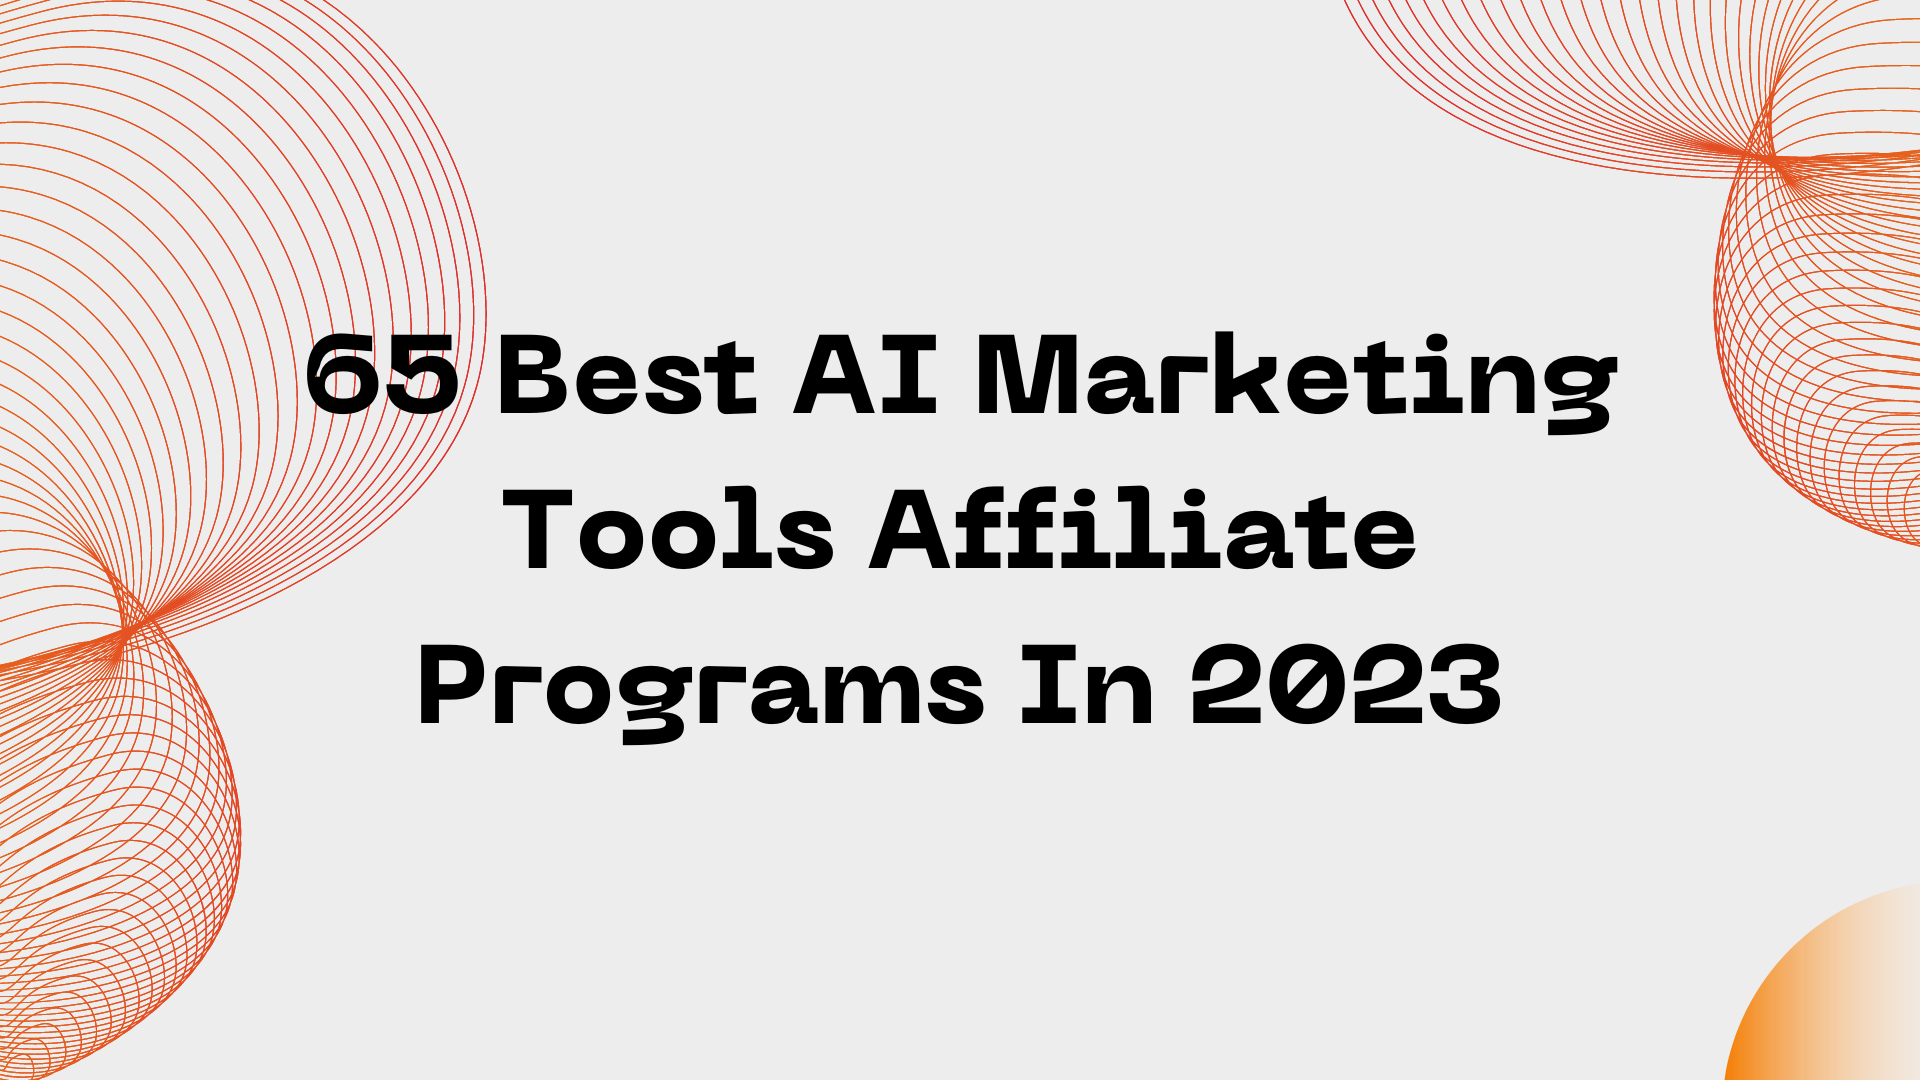 65 Best AI Marketing Tools Affiliate Programs In 2023